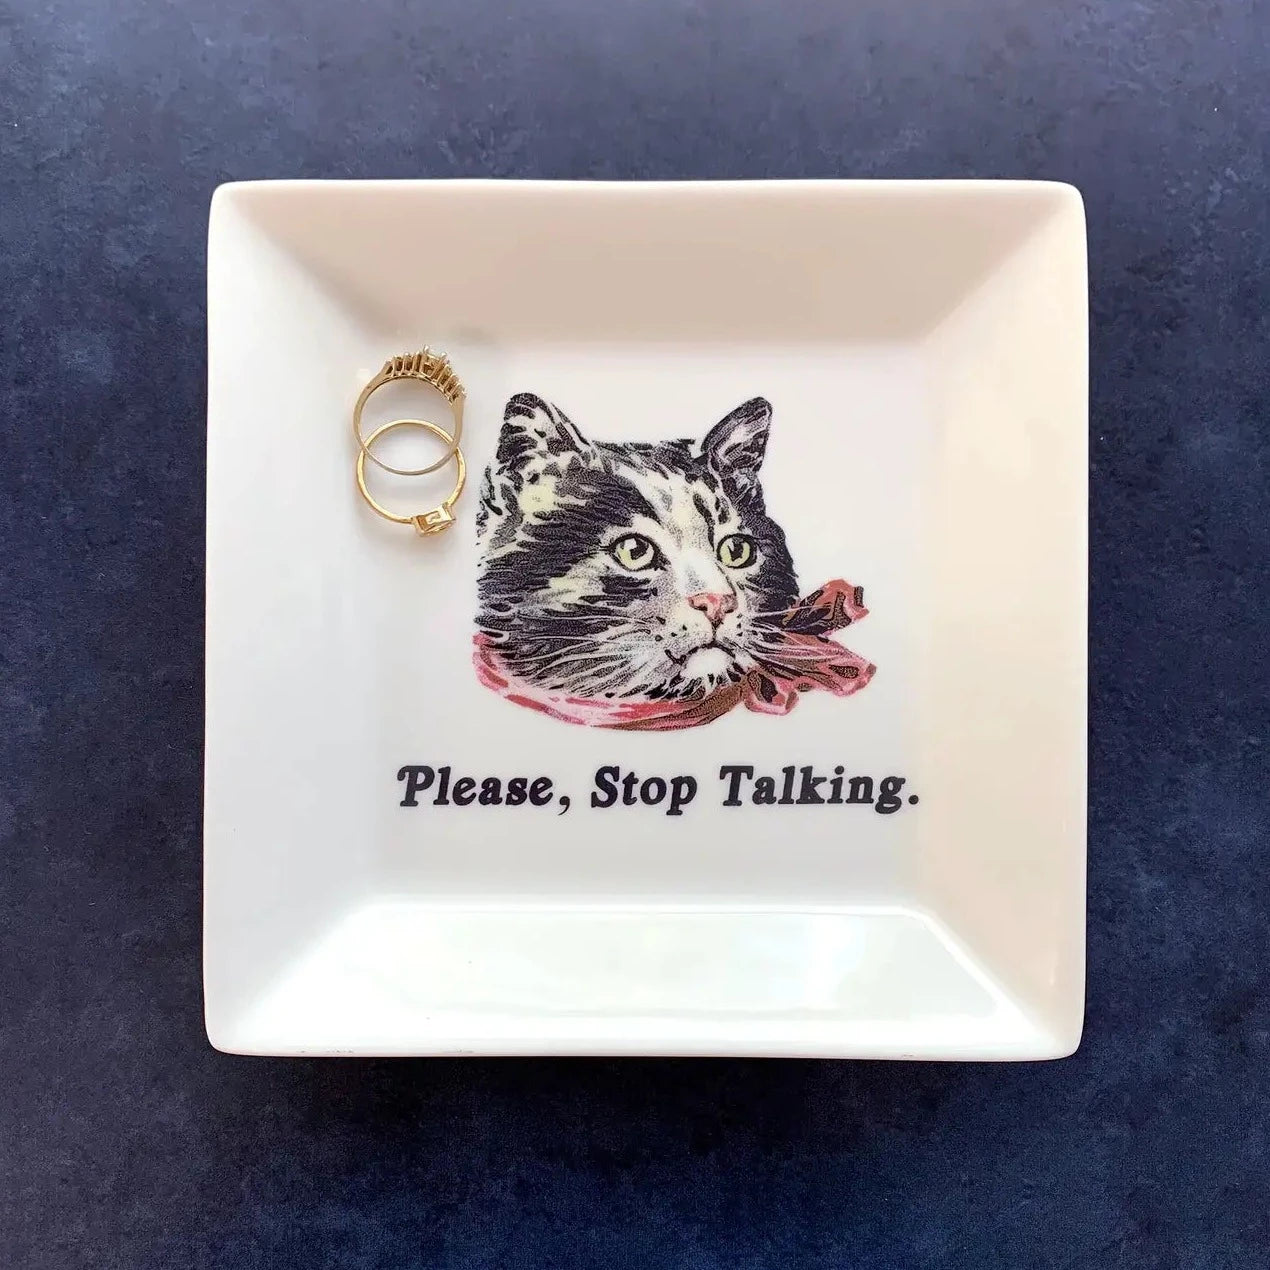 "Please, Stop Talking." - Cat Trinket Tray | Prelude and Dawn Los Angeles, CA